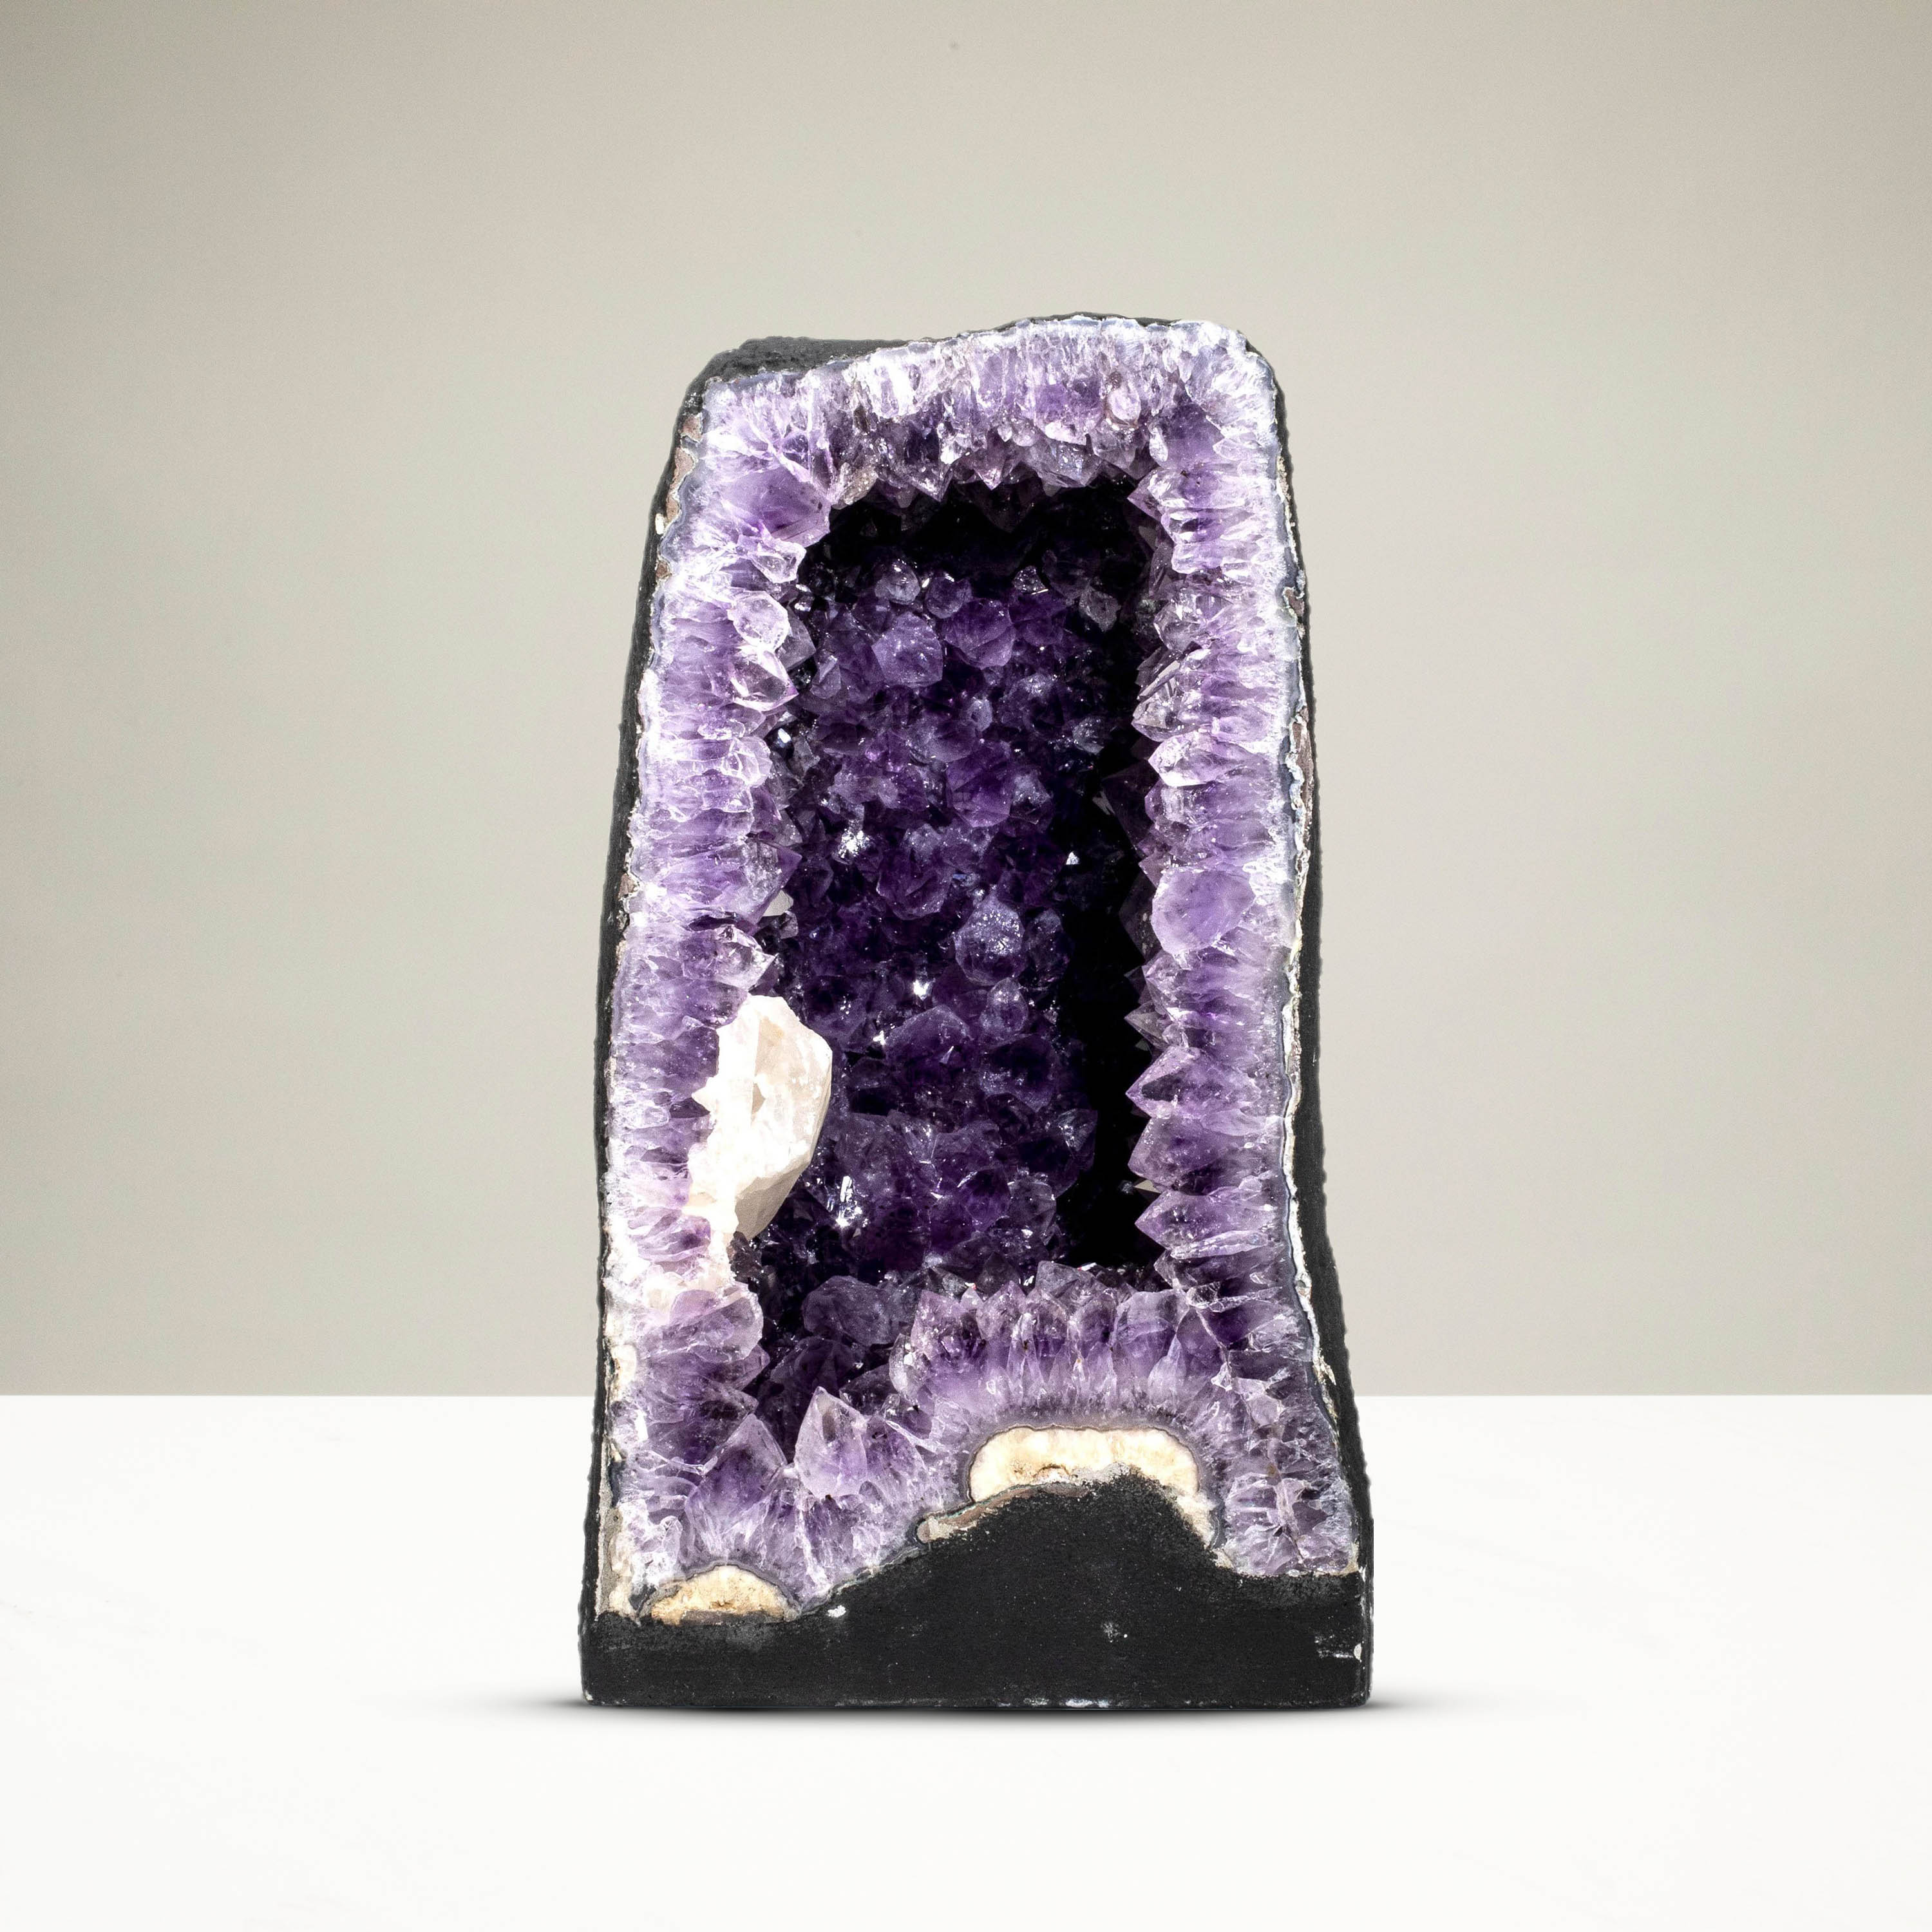 Kalifano Amethyst Natural Brazilian Amethyst Crystal Geode Cathedral - 15 in / 62 lbs BAG6600.002